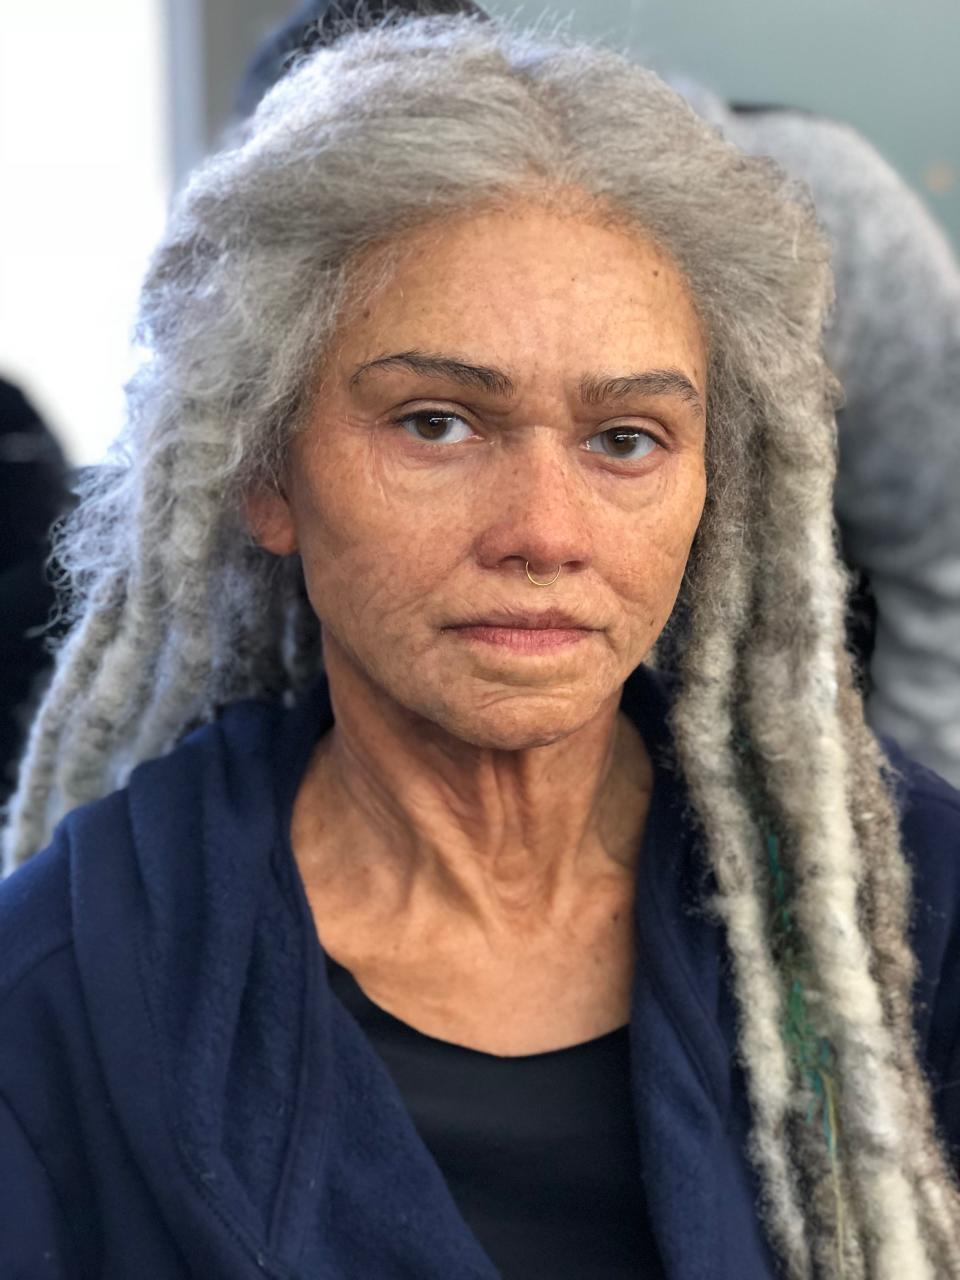 Snyder put makeup on actress Zendaya for her role in the Netflix mystery drama "The OA."